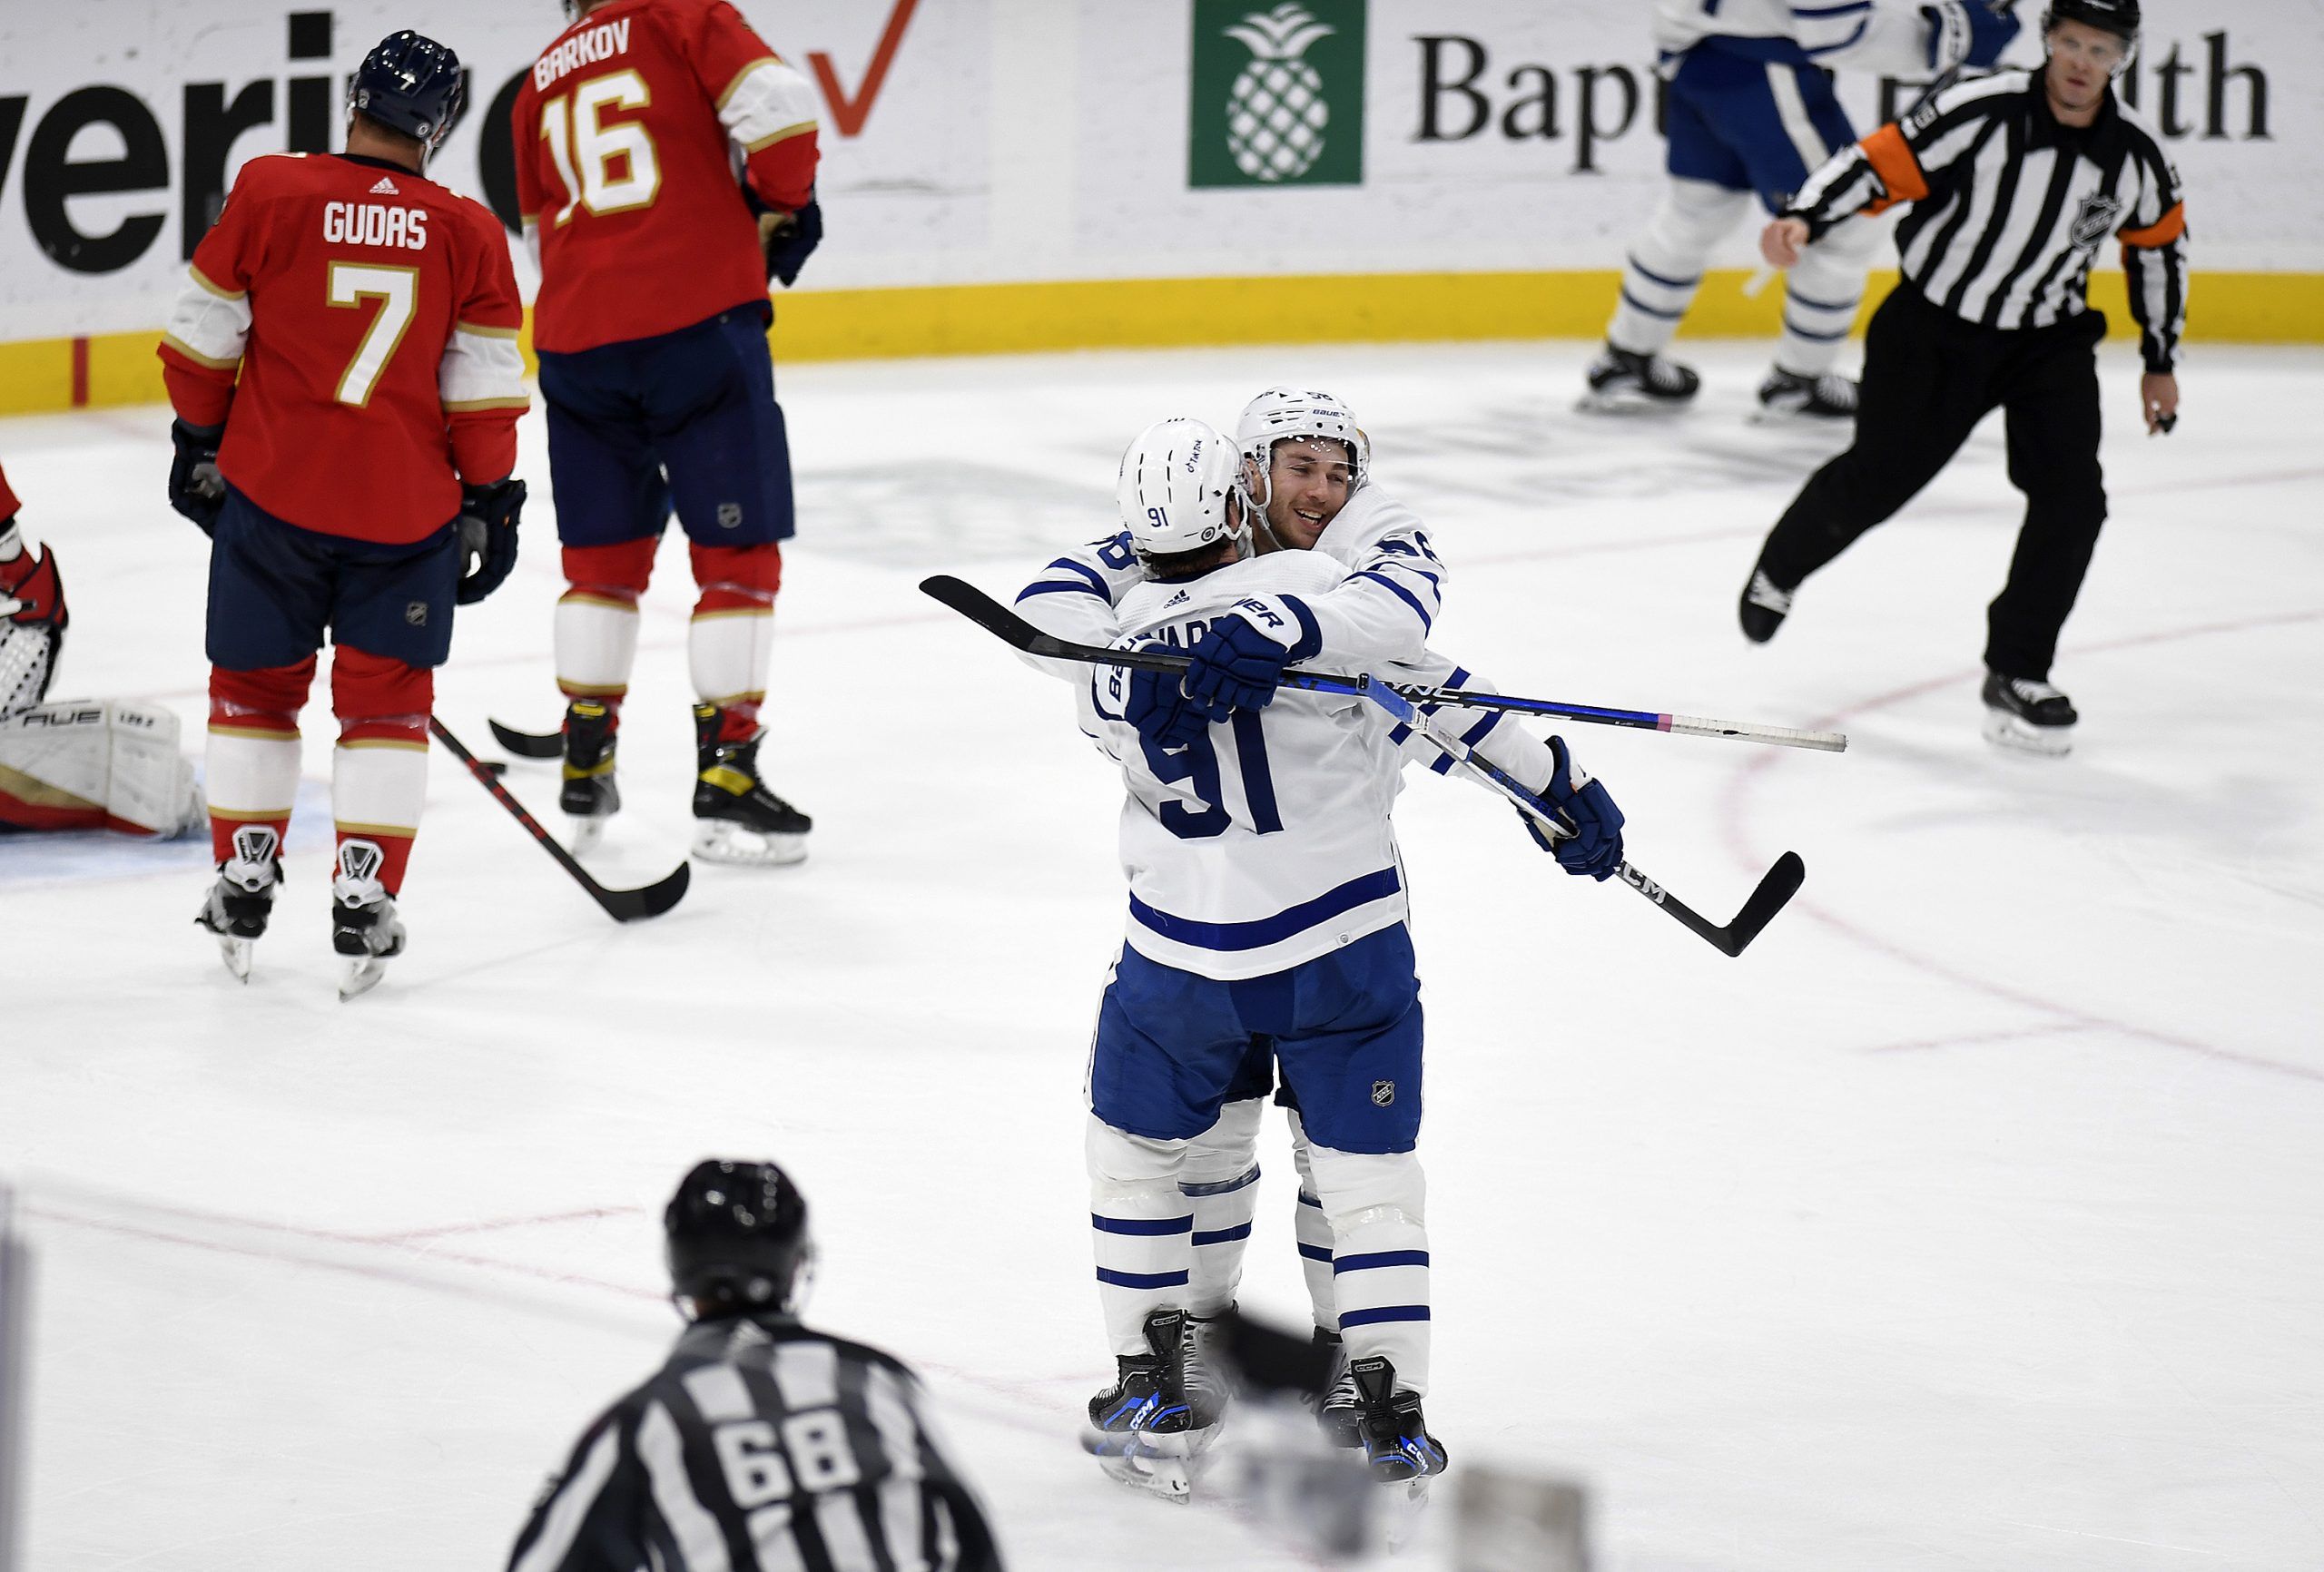 Brothers skip Pride jerseys; Panthers lose to Maple Leafs 